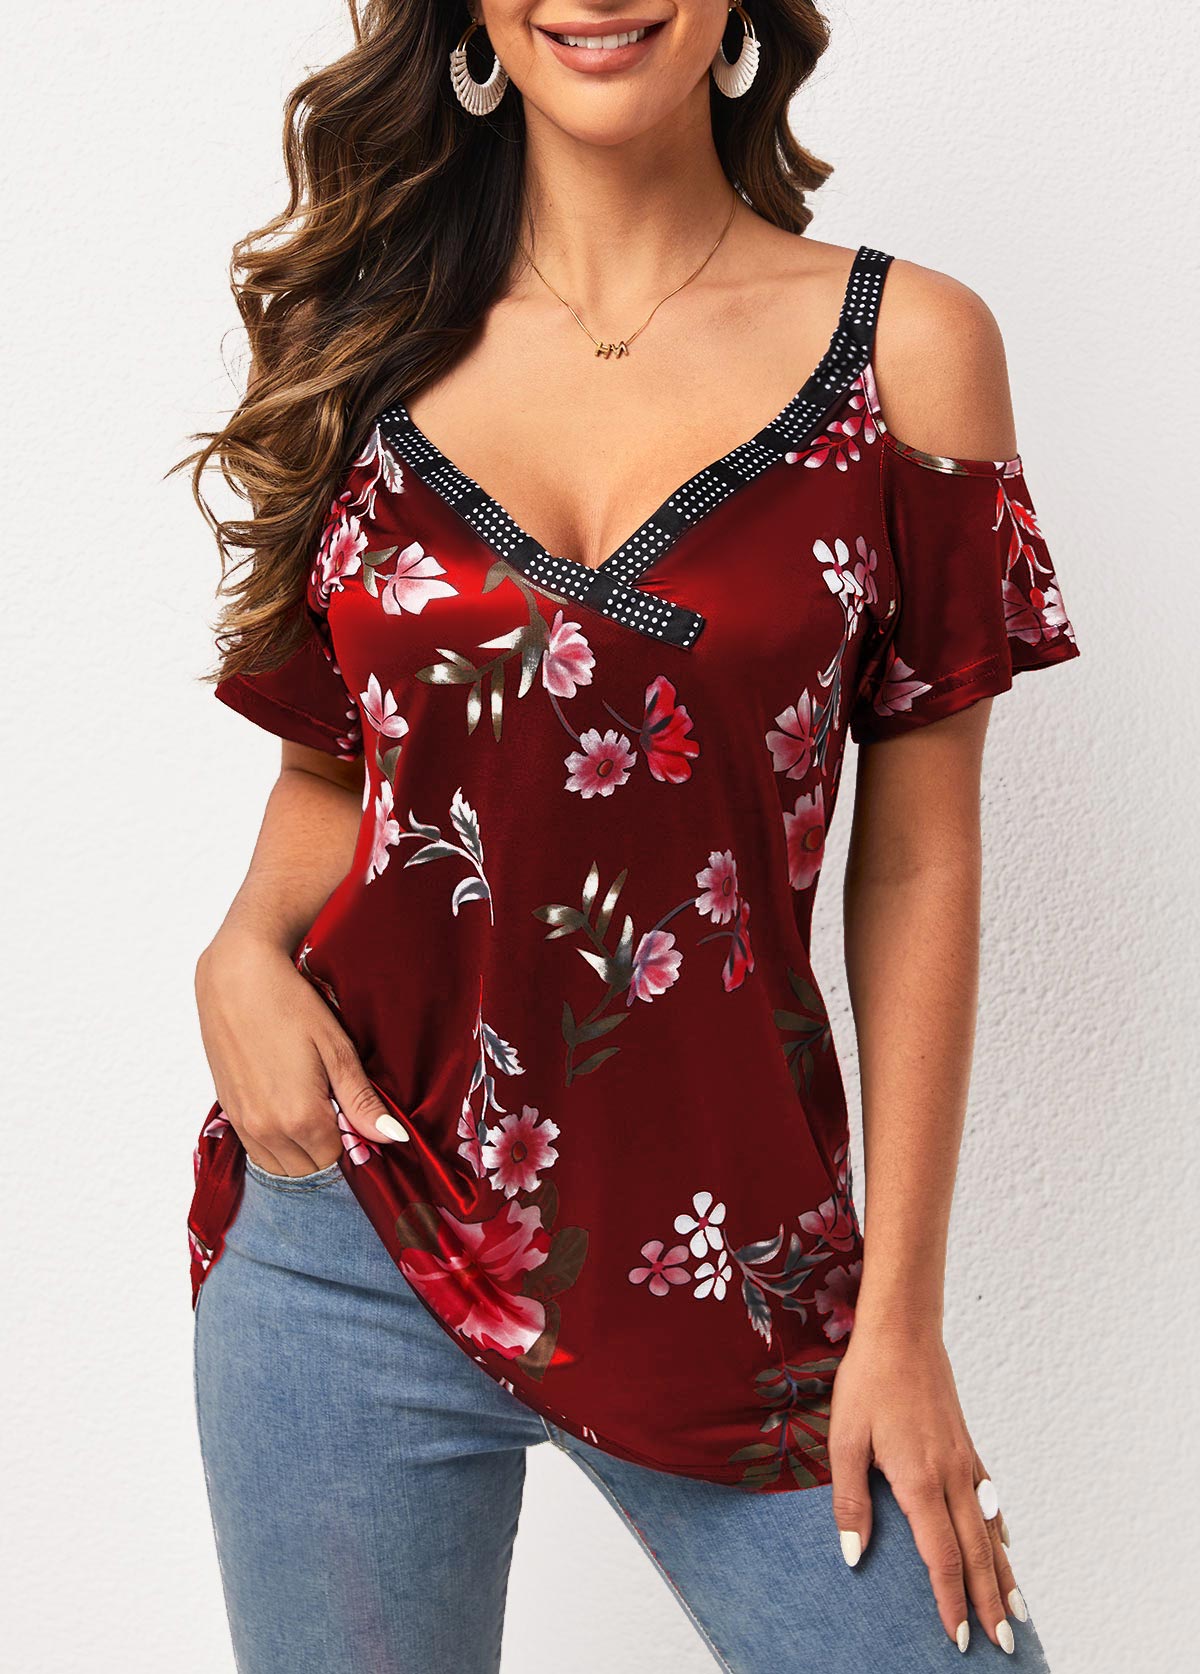 Strappy Cold Shoulder Wine Red Floral Print T Shirt